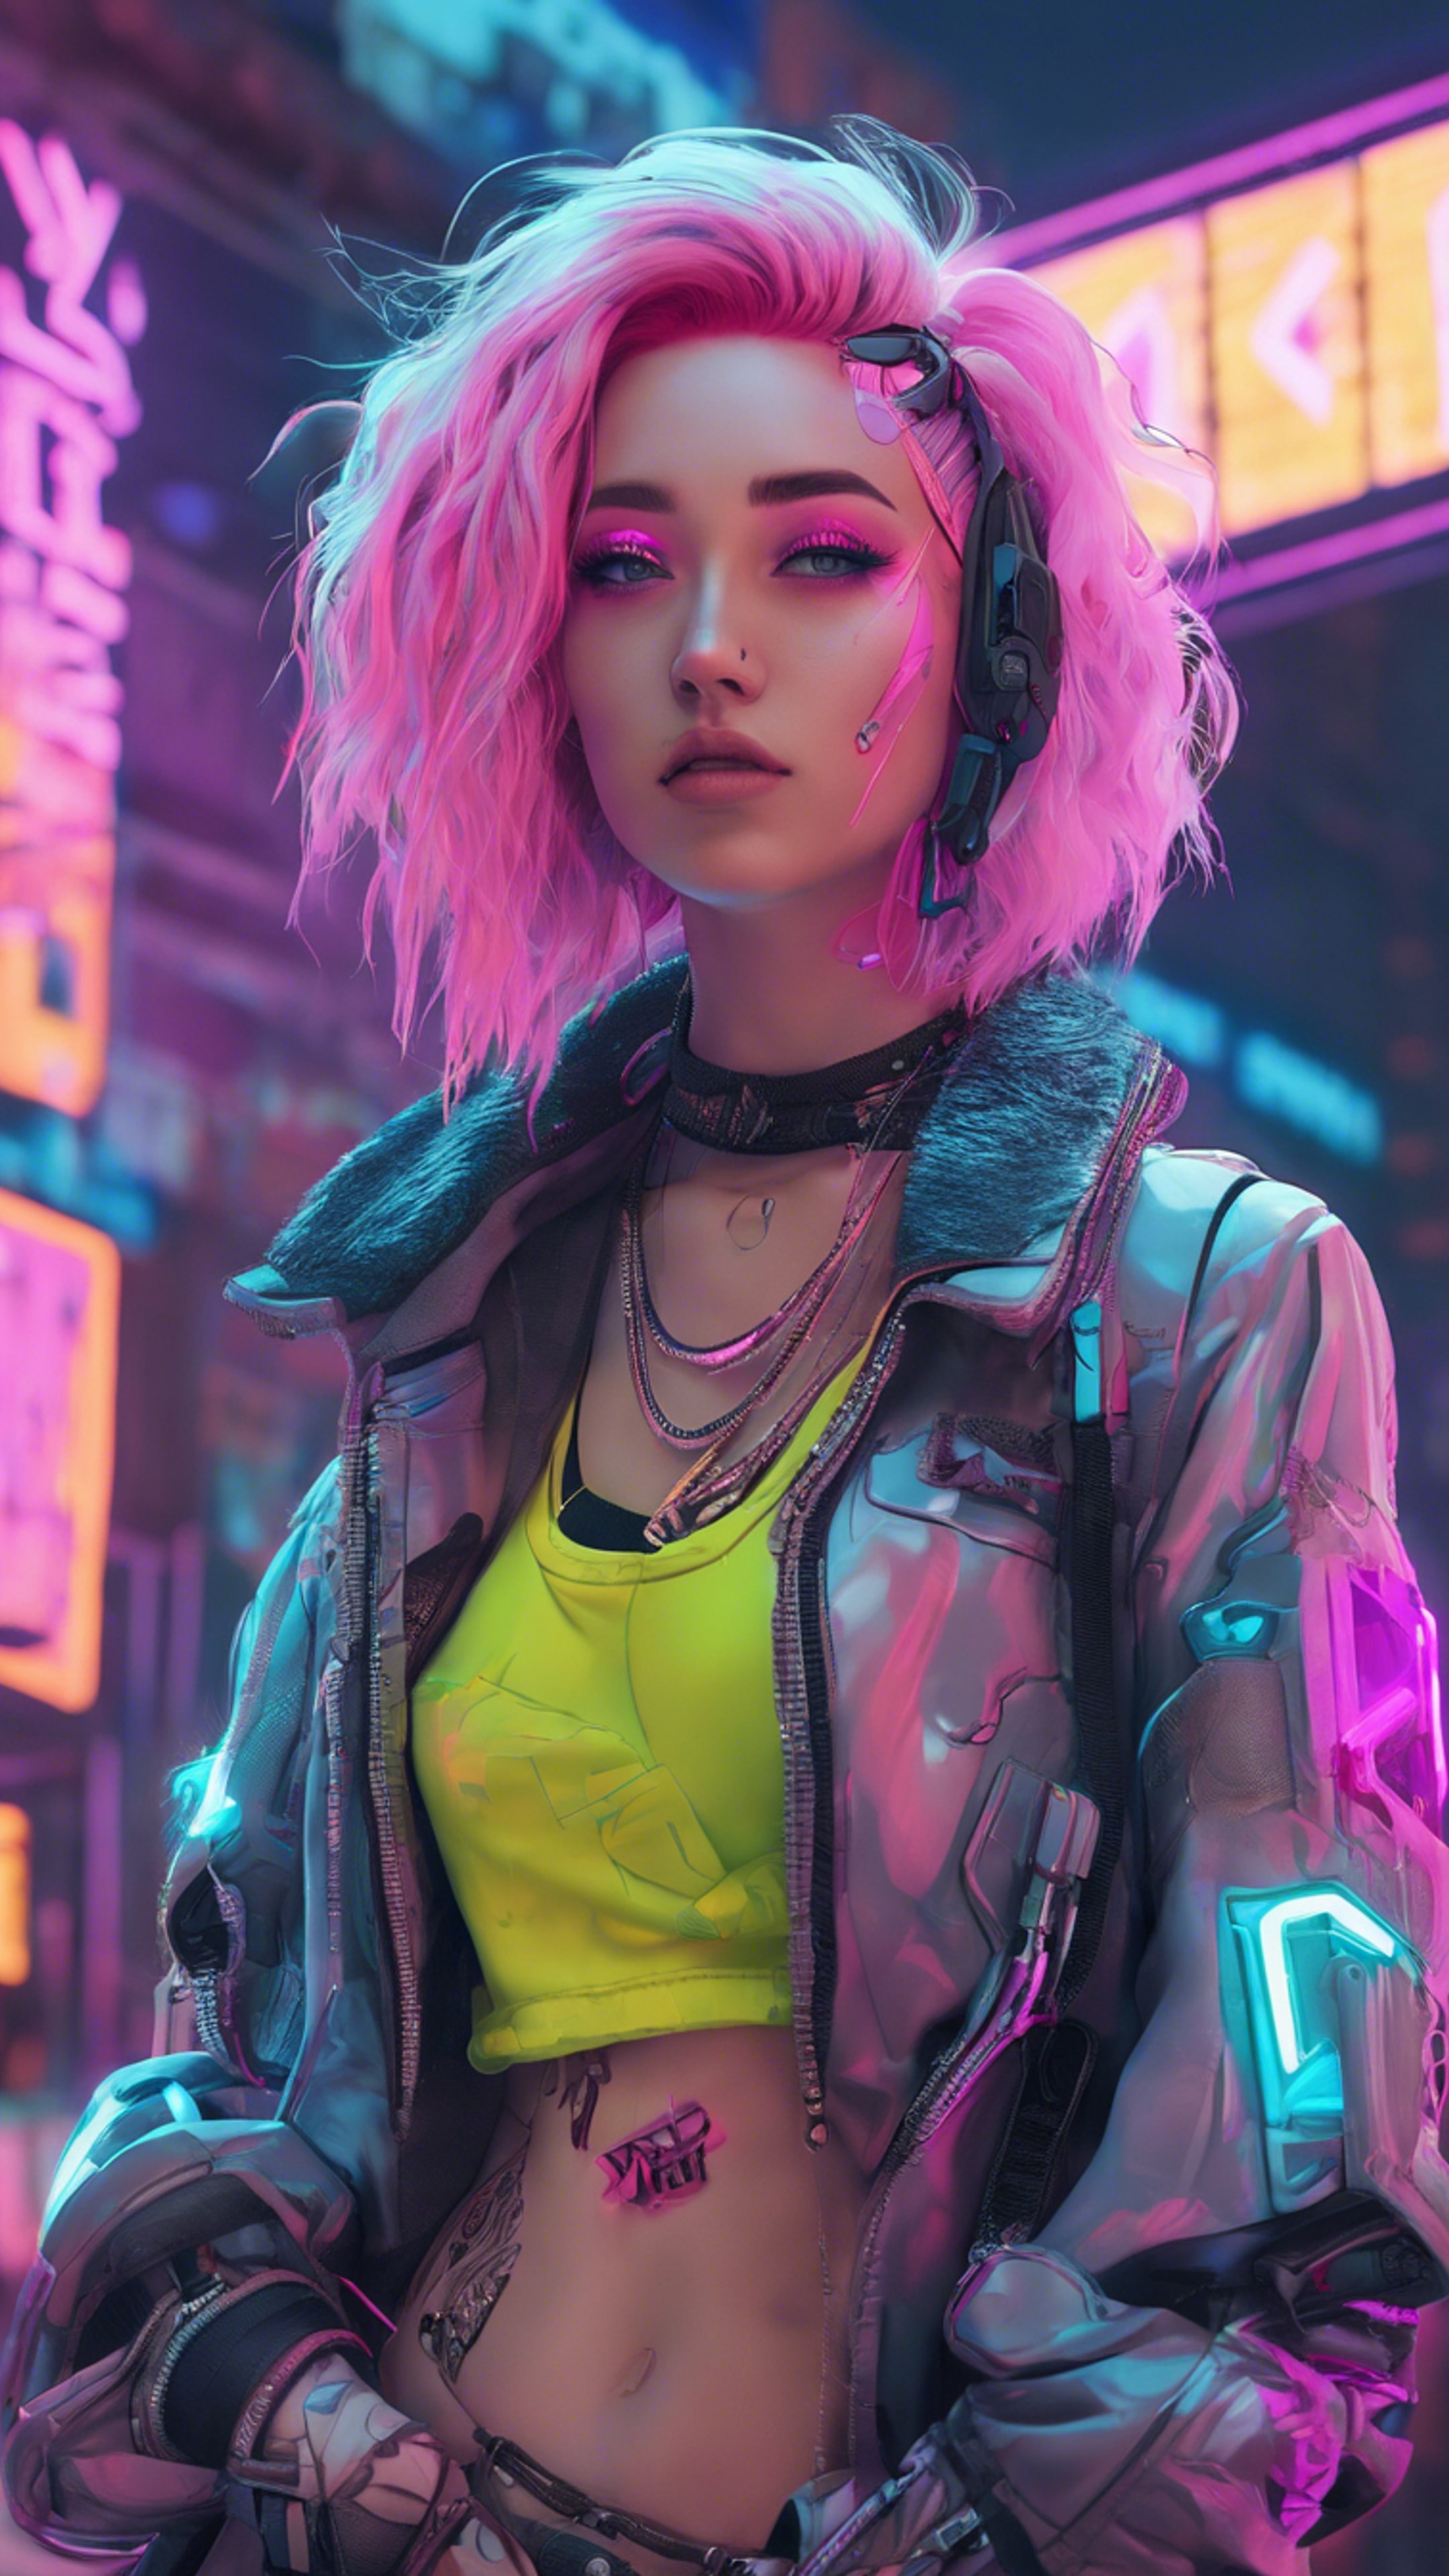 A pastel cyberpunk girl with brightly colored hair, standing in front of a neon sign. Tapet[dbbad63d7b584975aa4e]